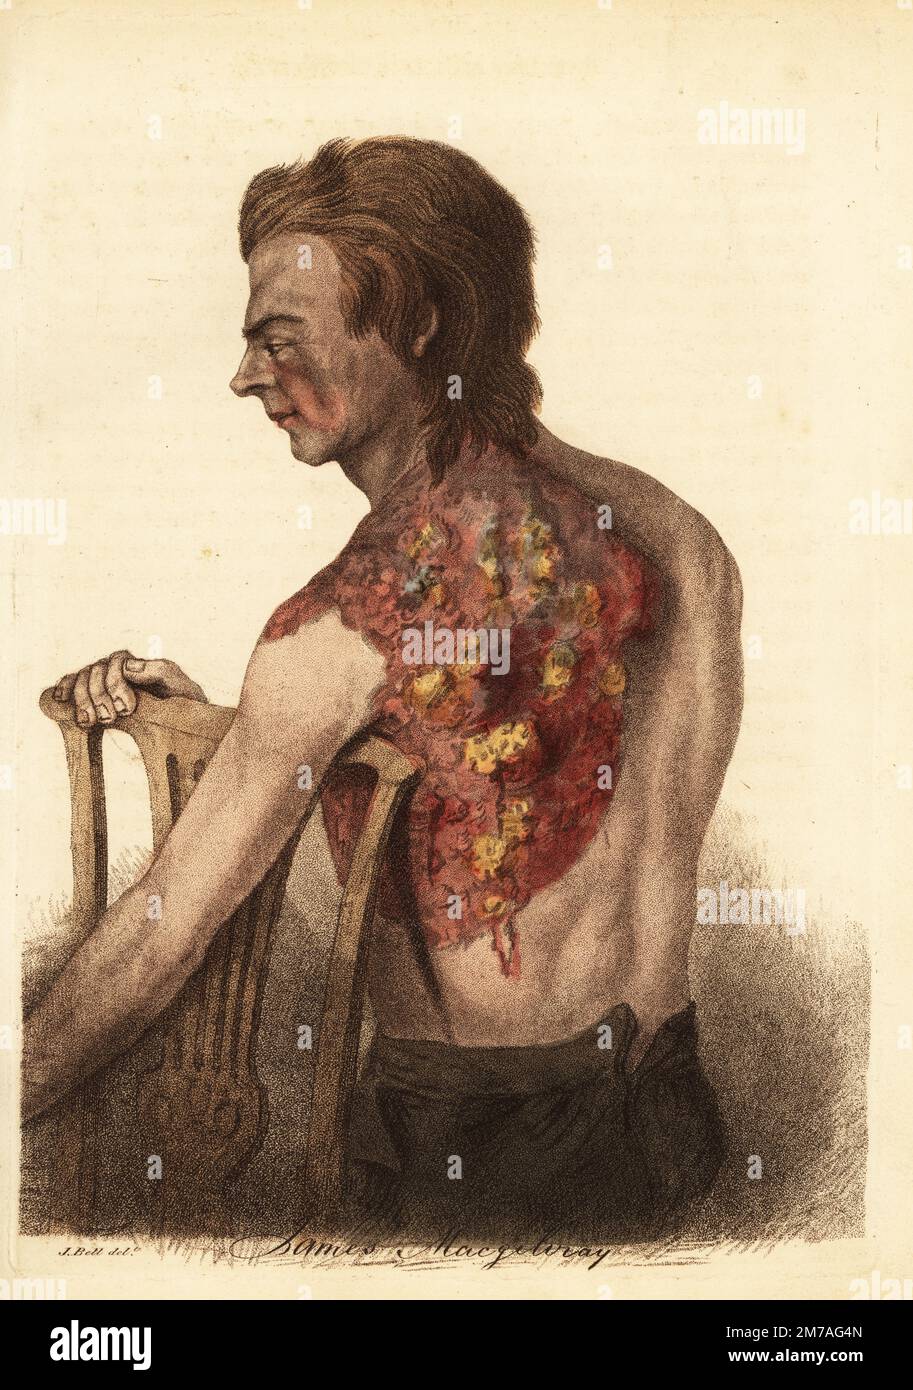 Soldier with an abscess from a gunshot wound to the shoulder. Sergeant M'Gillivray of the 68th (Durham) Regiment was shot in the shoulder in the Siege of Nijmegen, 1794. Entrance wound to the clavicle and exit at the scapula. Captured and imprisoned by the French for three years. Inflamed abscesses and ulcers cover his left shoulder and back. Cured by lancing, bathing and camomile decoction. James MacGilivray. Handcoloured copperplate engraving after an illustration by John Bell from his own Principles of Surgery, as they Relate to Wounds, Ulcers and Fistulas, Longman,  Hurst, Rees, Orme and B Stock Photo